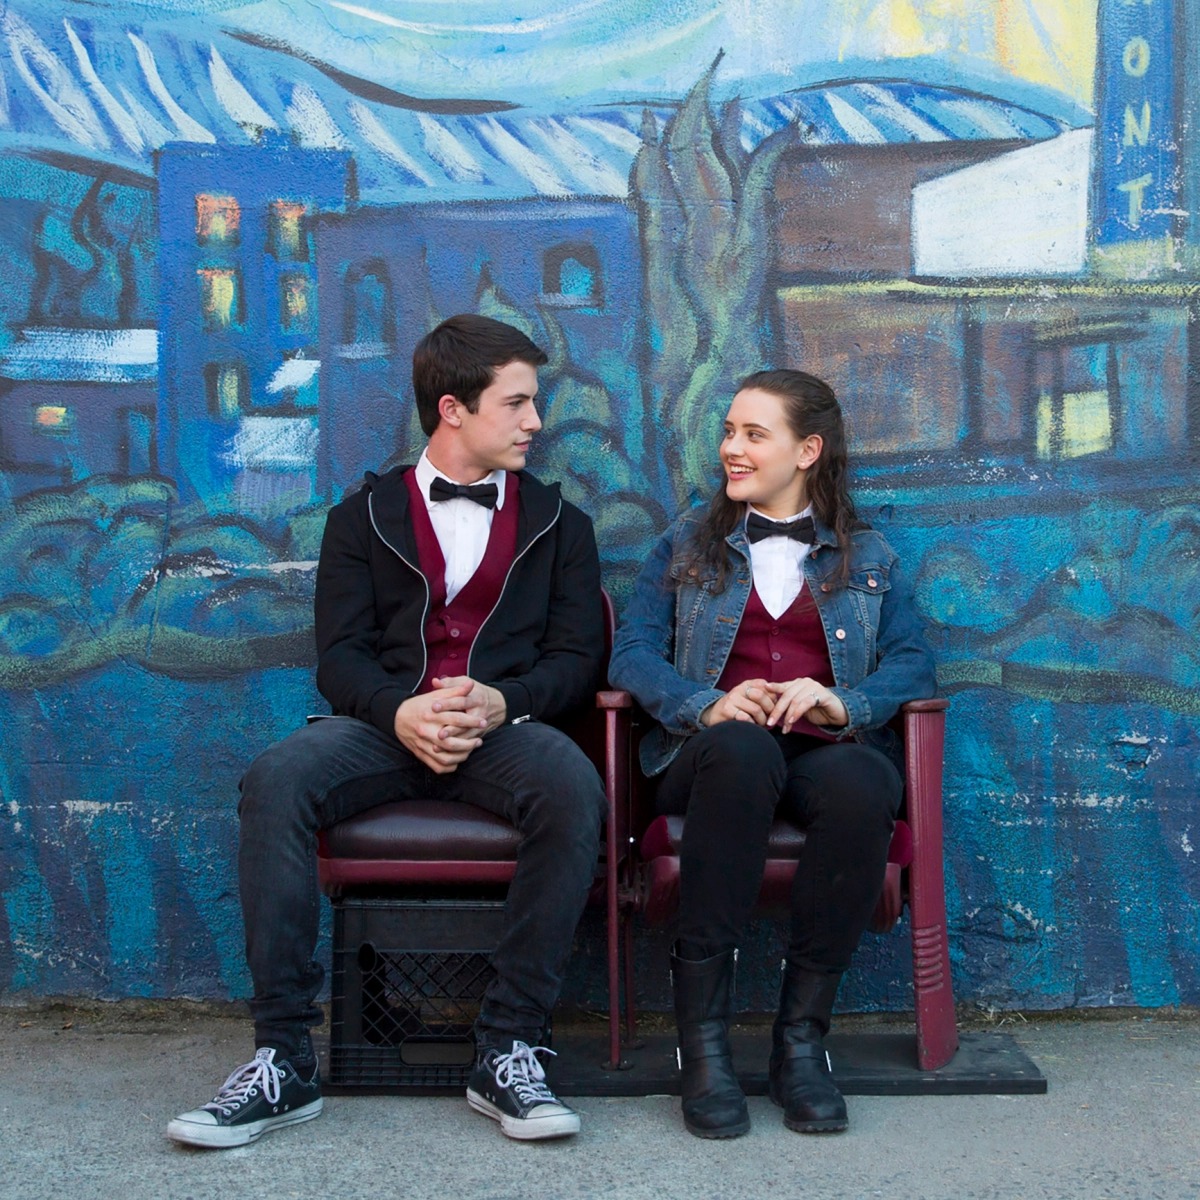 Katherine Langford as Hannah Baker and Dylan Minnette as Clay Jensen in '13 Reasons Why.'